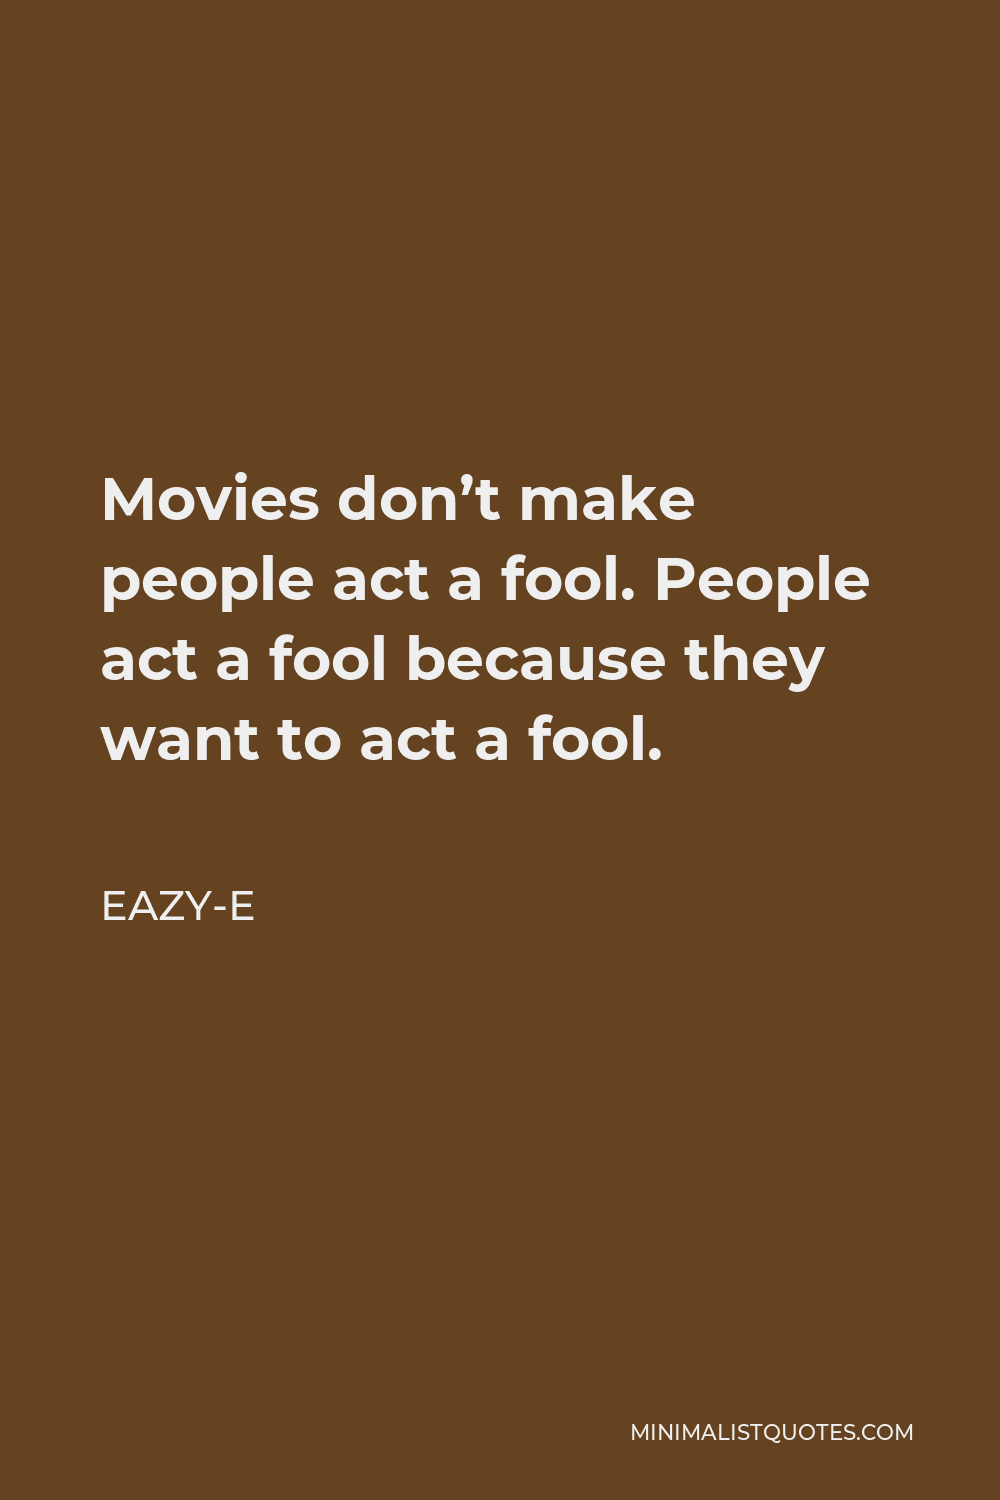 Eazy-E Quote - Movies don’t make people act a fool. People act a fool because they want to act a fool.